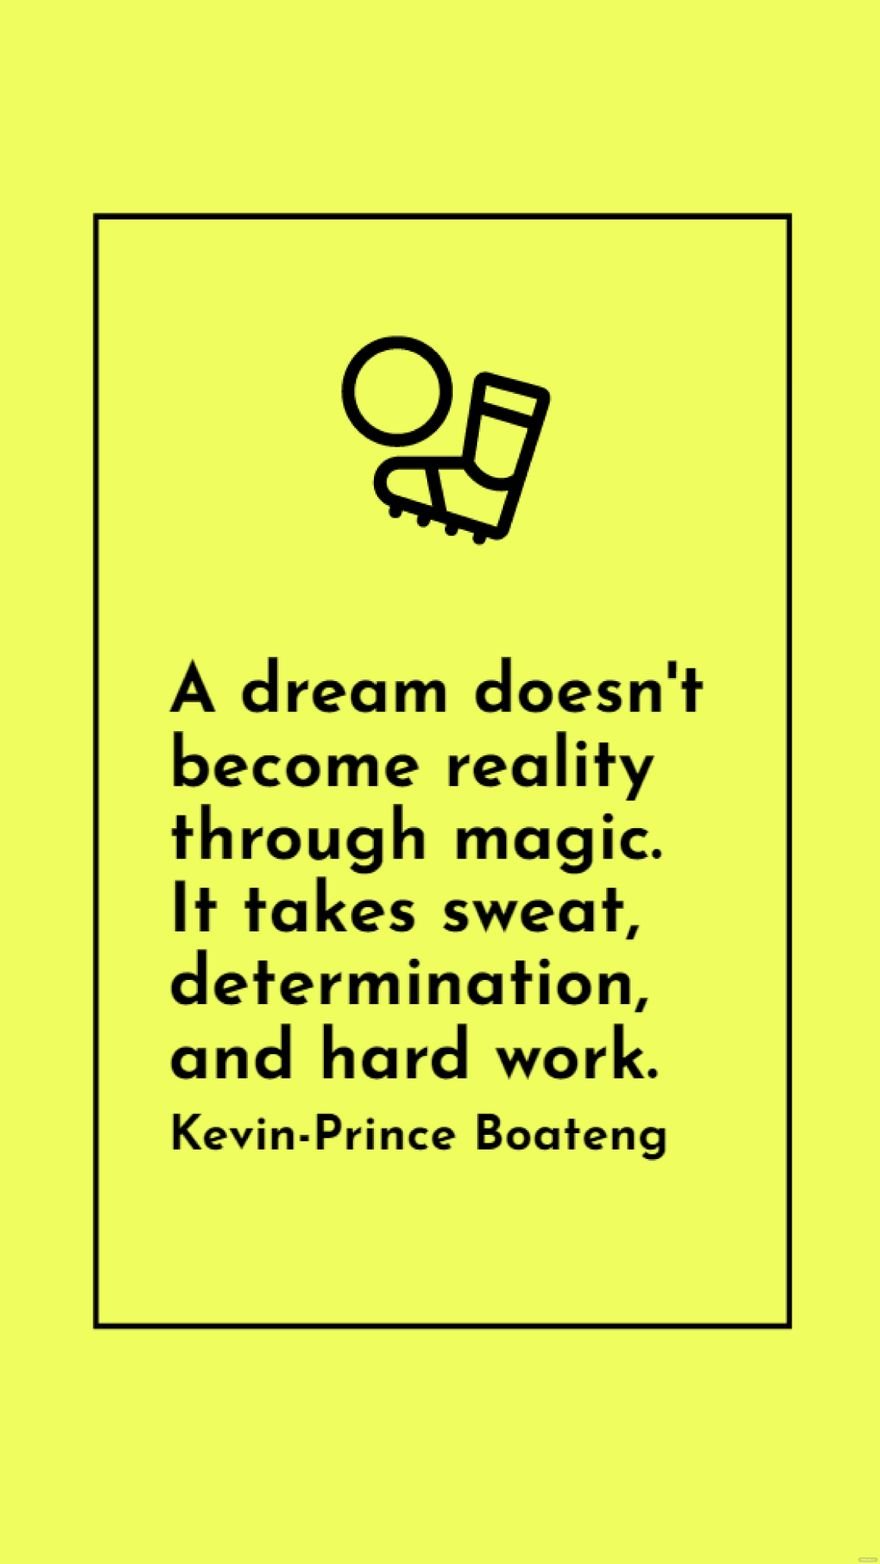 Free Kevin-Prince Boateng - A dream doesn't become reality through magic. It takes sweat, determination, and hard work. in JPG